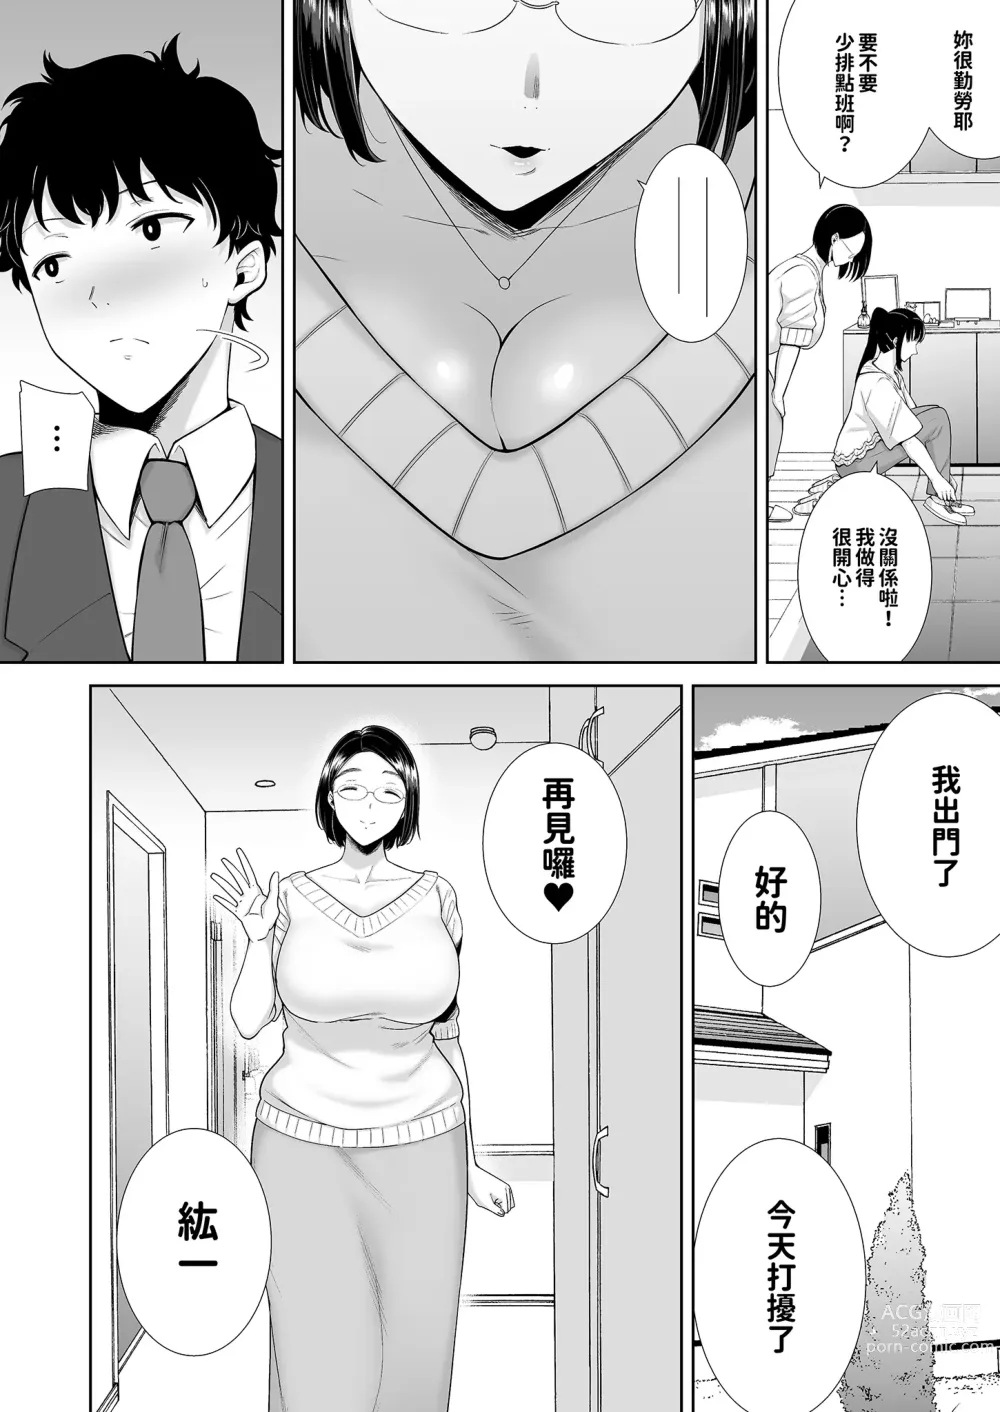 Page 6 of doujinshi KanoMama Syndrome 1+2 (uncensored)